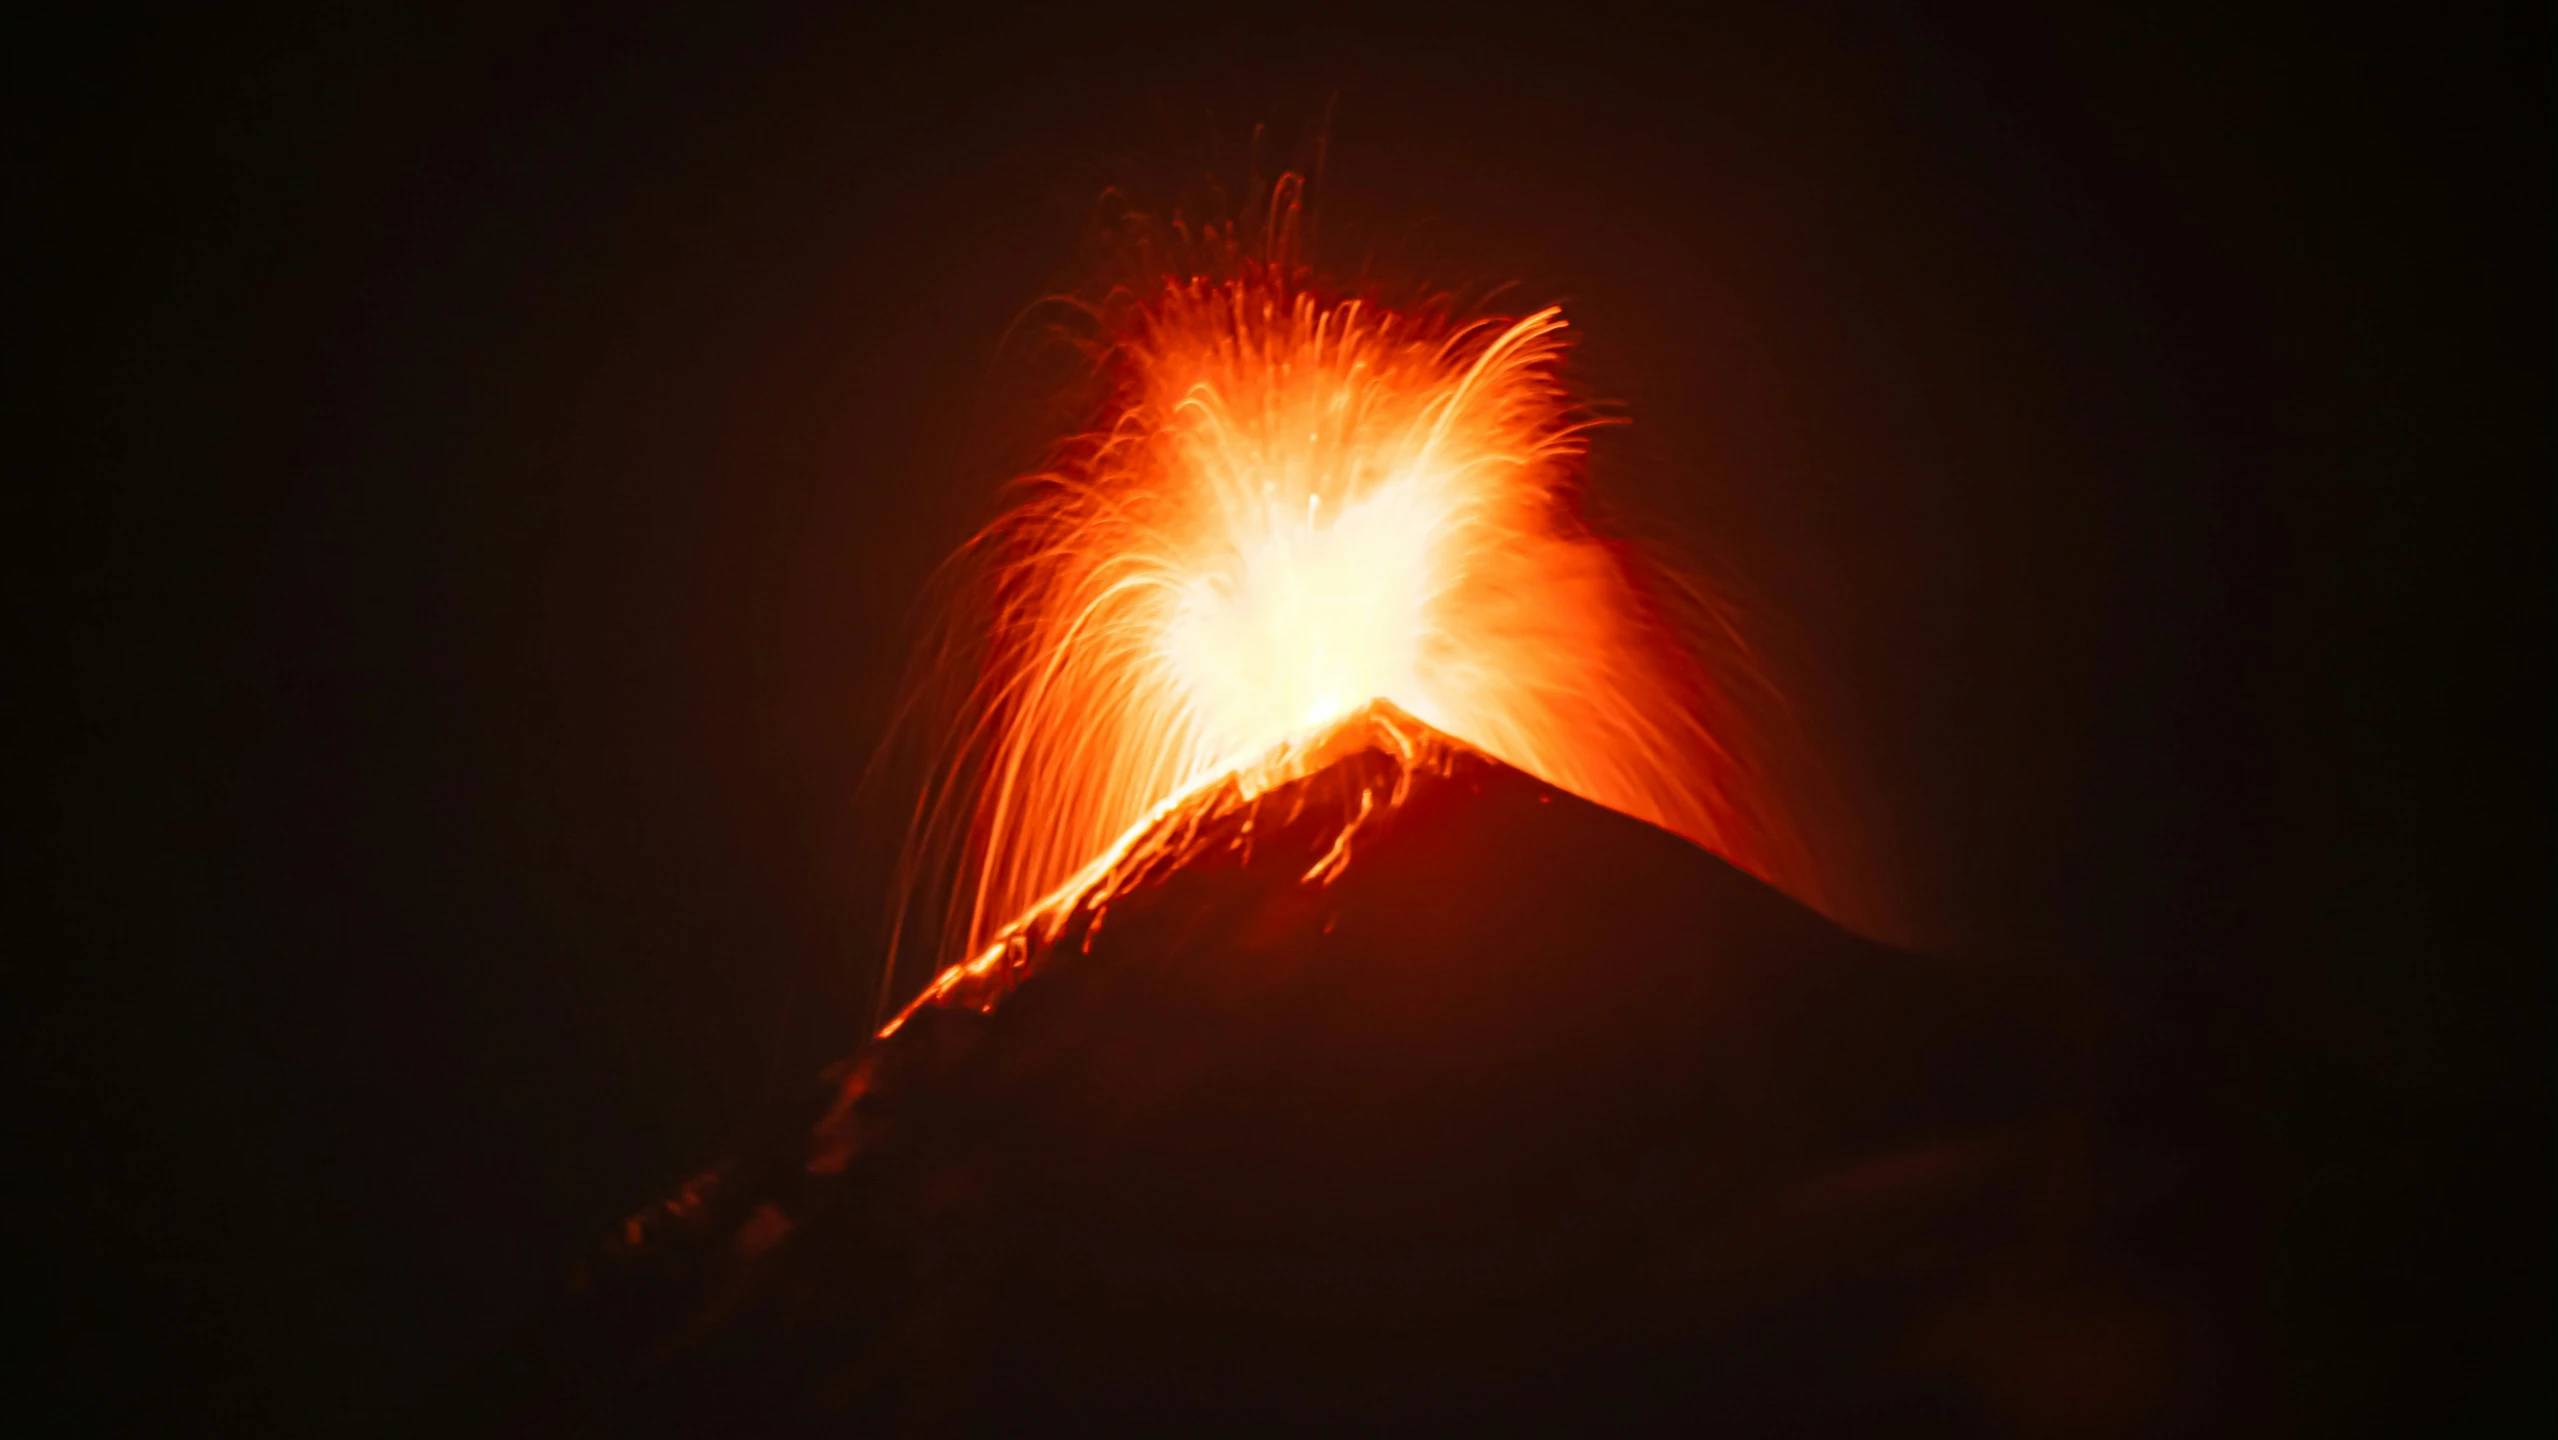 the bright fire from below shows on the peak